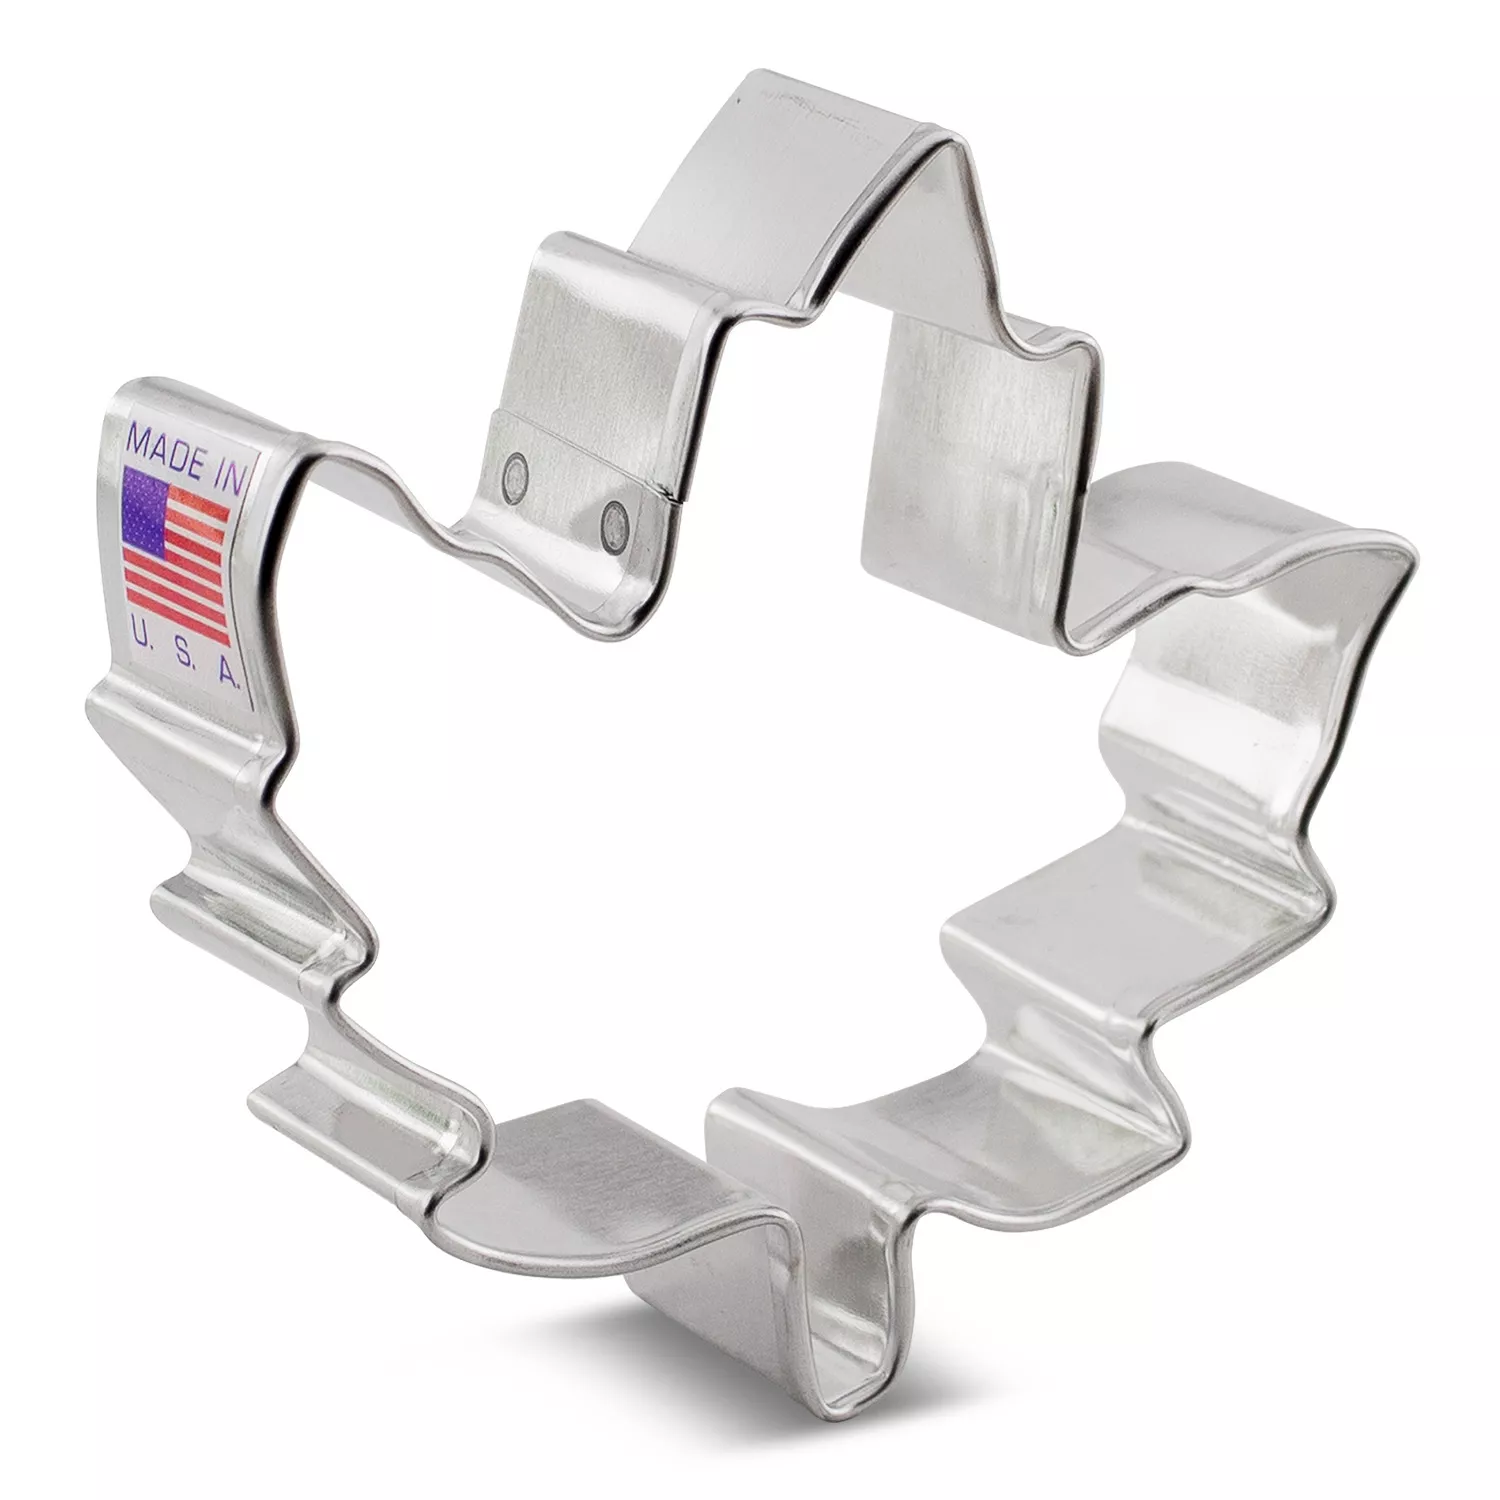  Shooting Star Cookie Cutter 4 Made in USA by Ann Clark: Home &  Kitchen